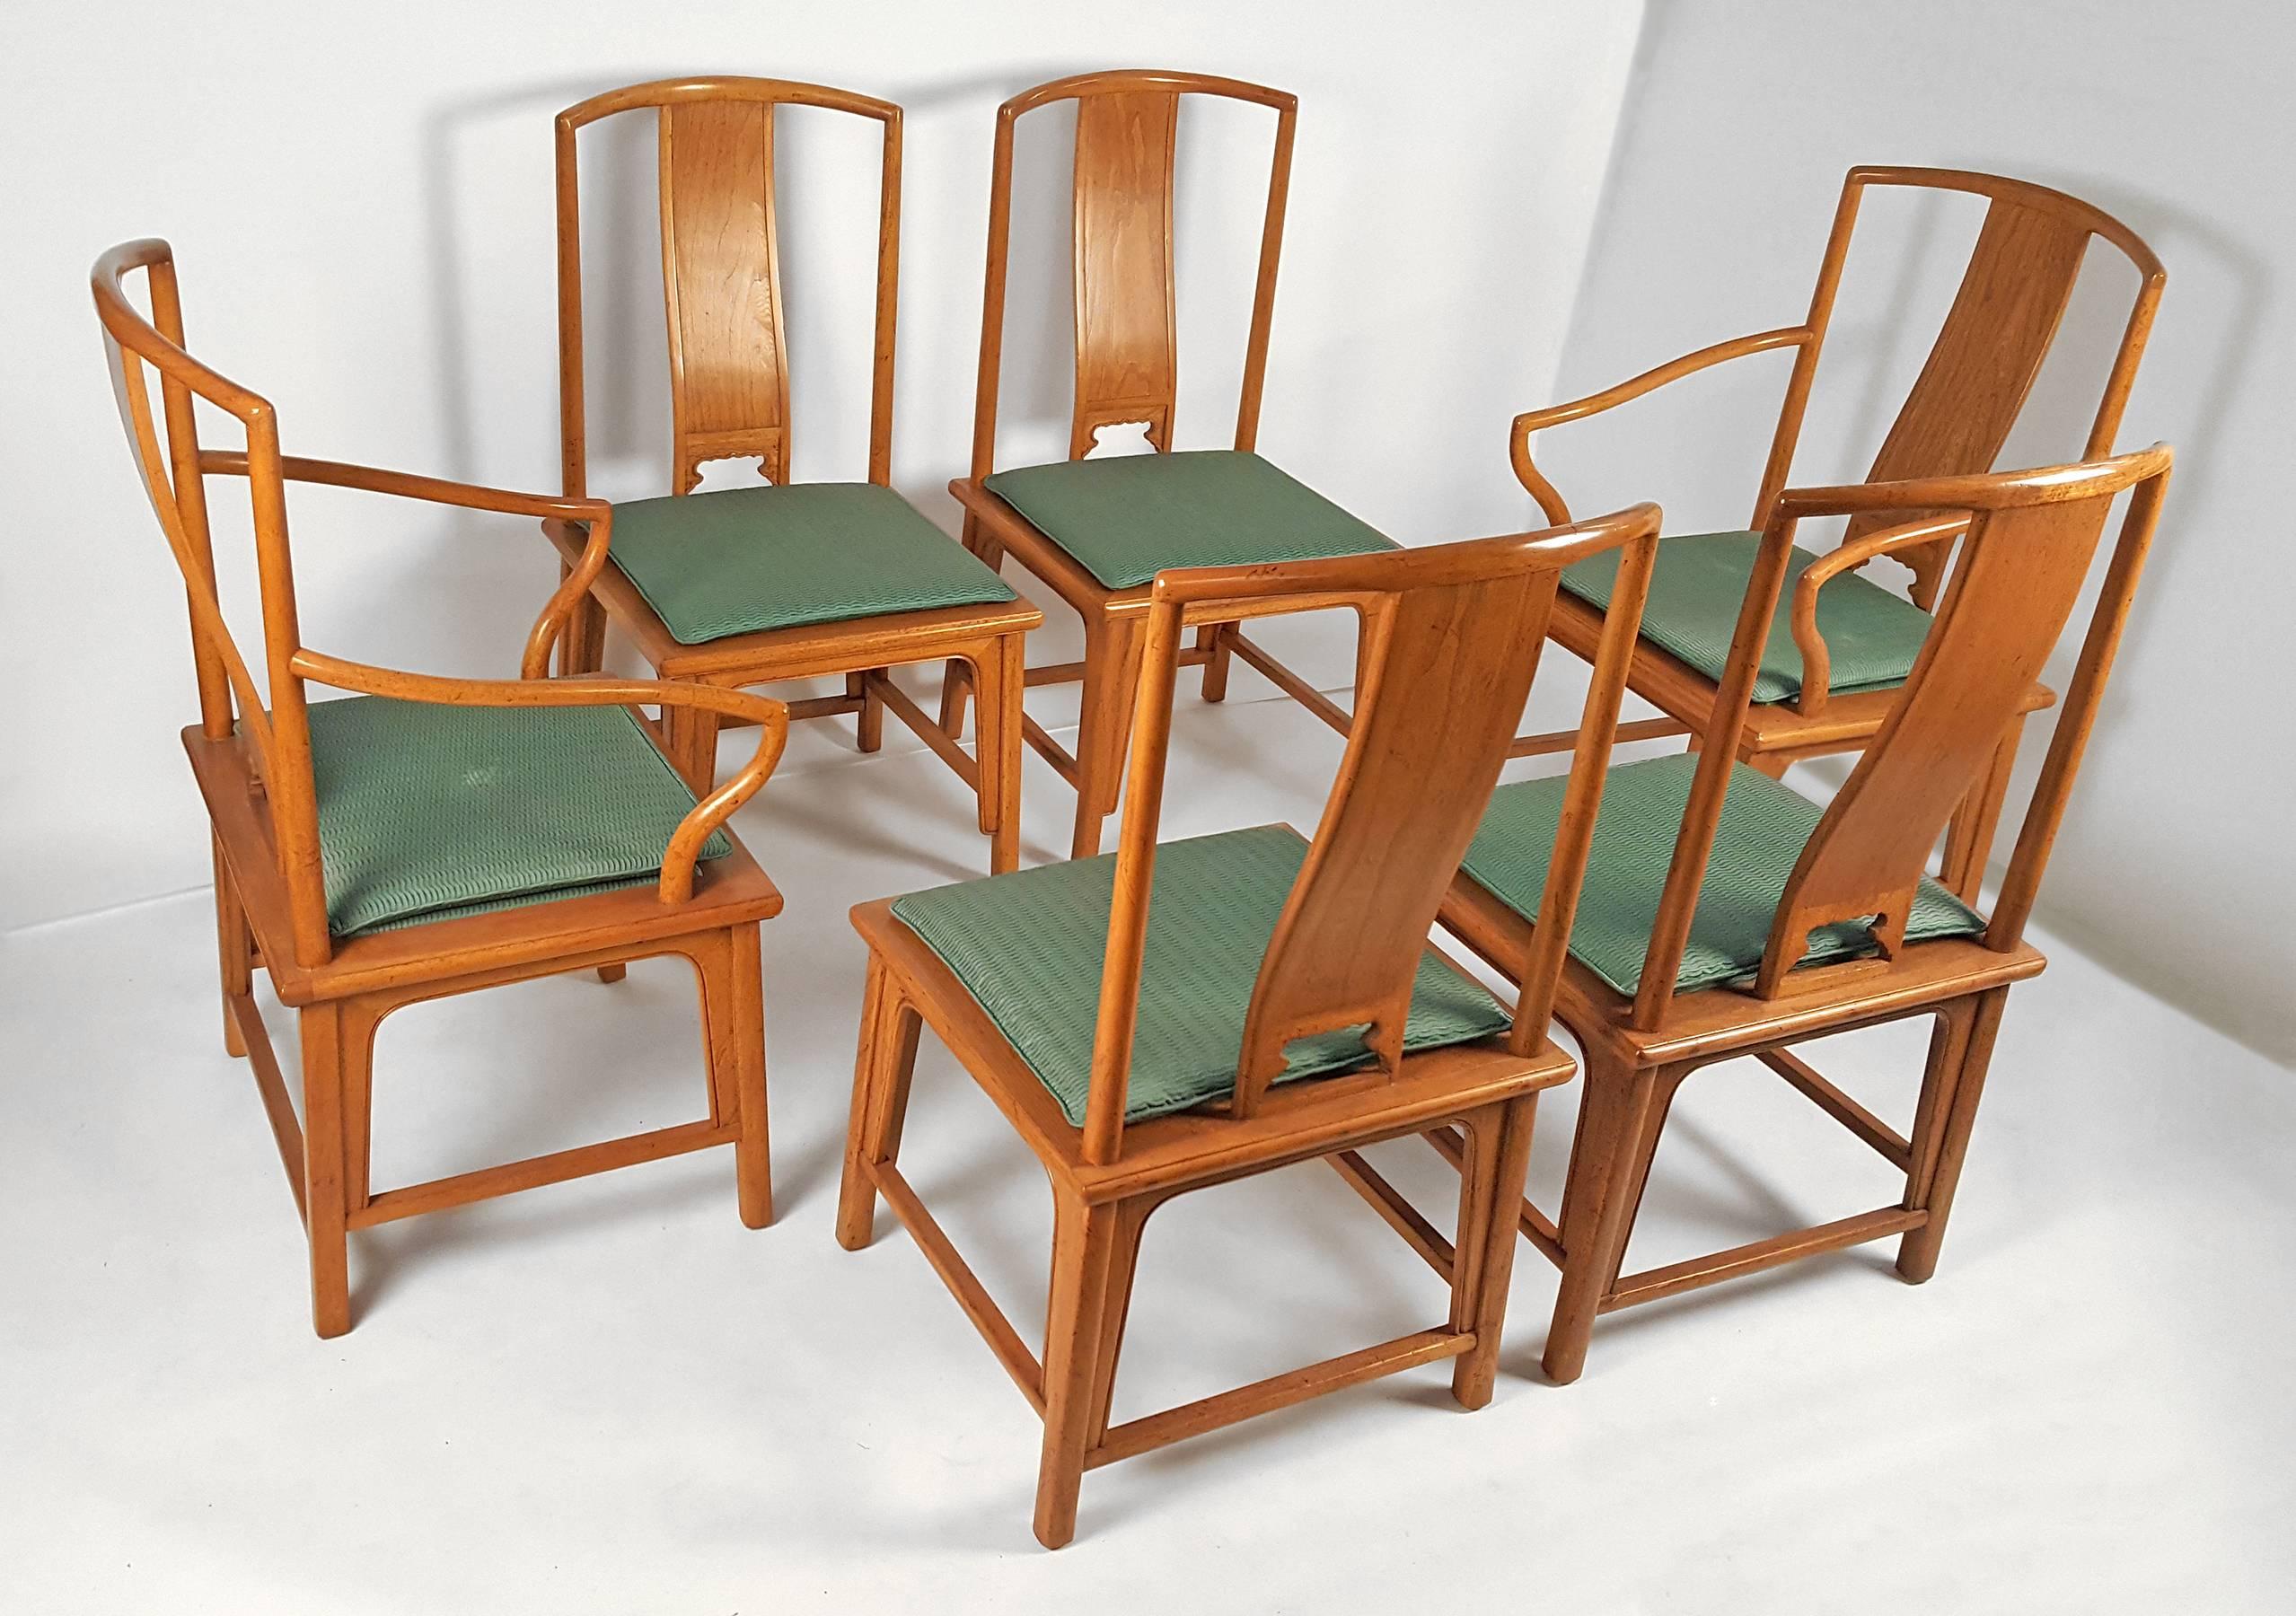 Gorgeous set of six vintage Baker Ming chairs. Very well constructed and very comfortable. All original. 

Baker dining side chairs 40.25” H x 21.5” W x 20” D
Baker dining arm chairs 40.5” H x 23” W x 20” D.